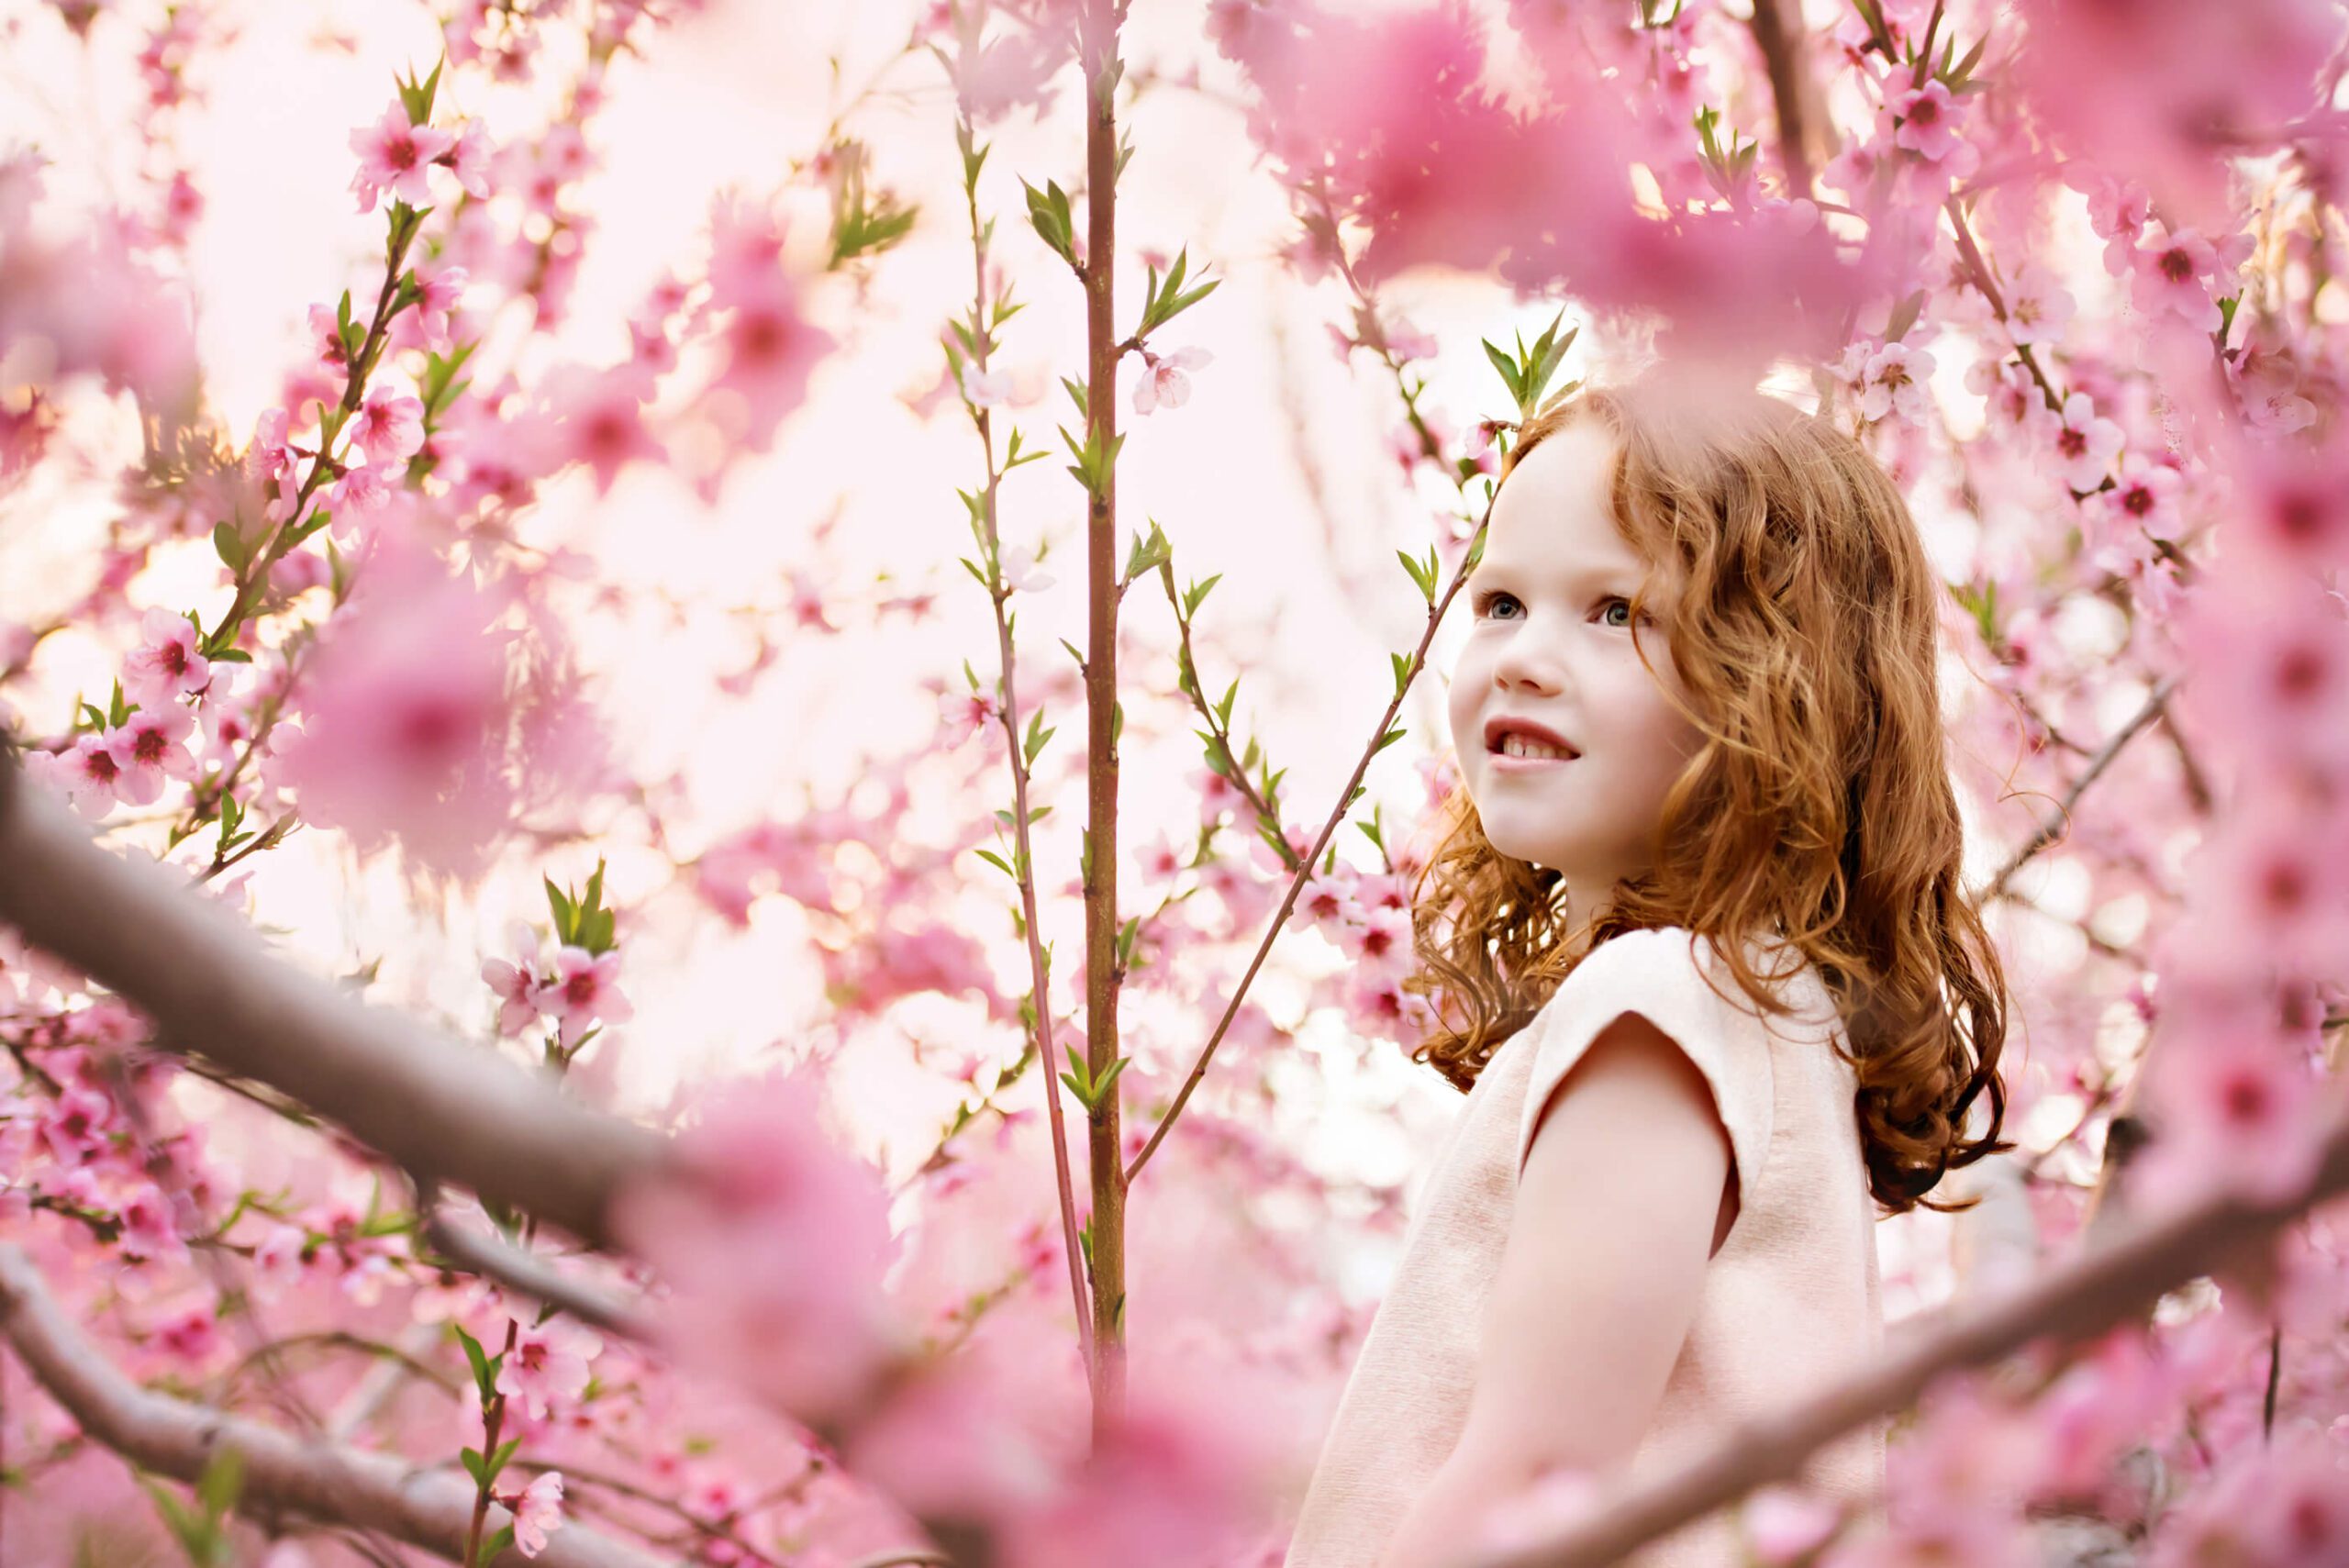 up close photo of little girl in the cherry treees